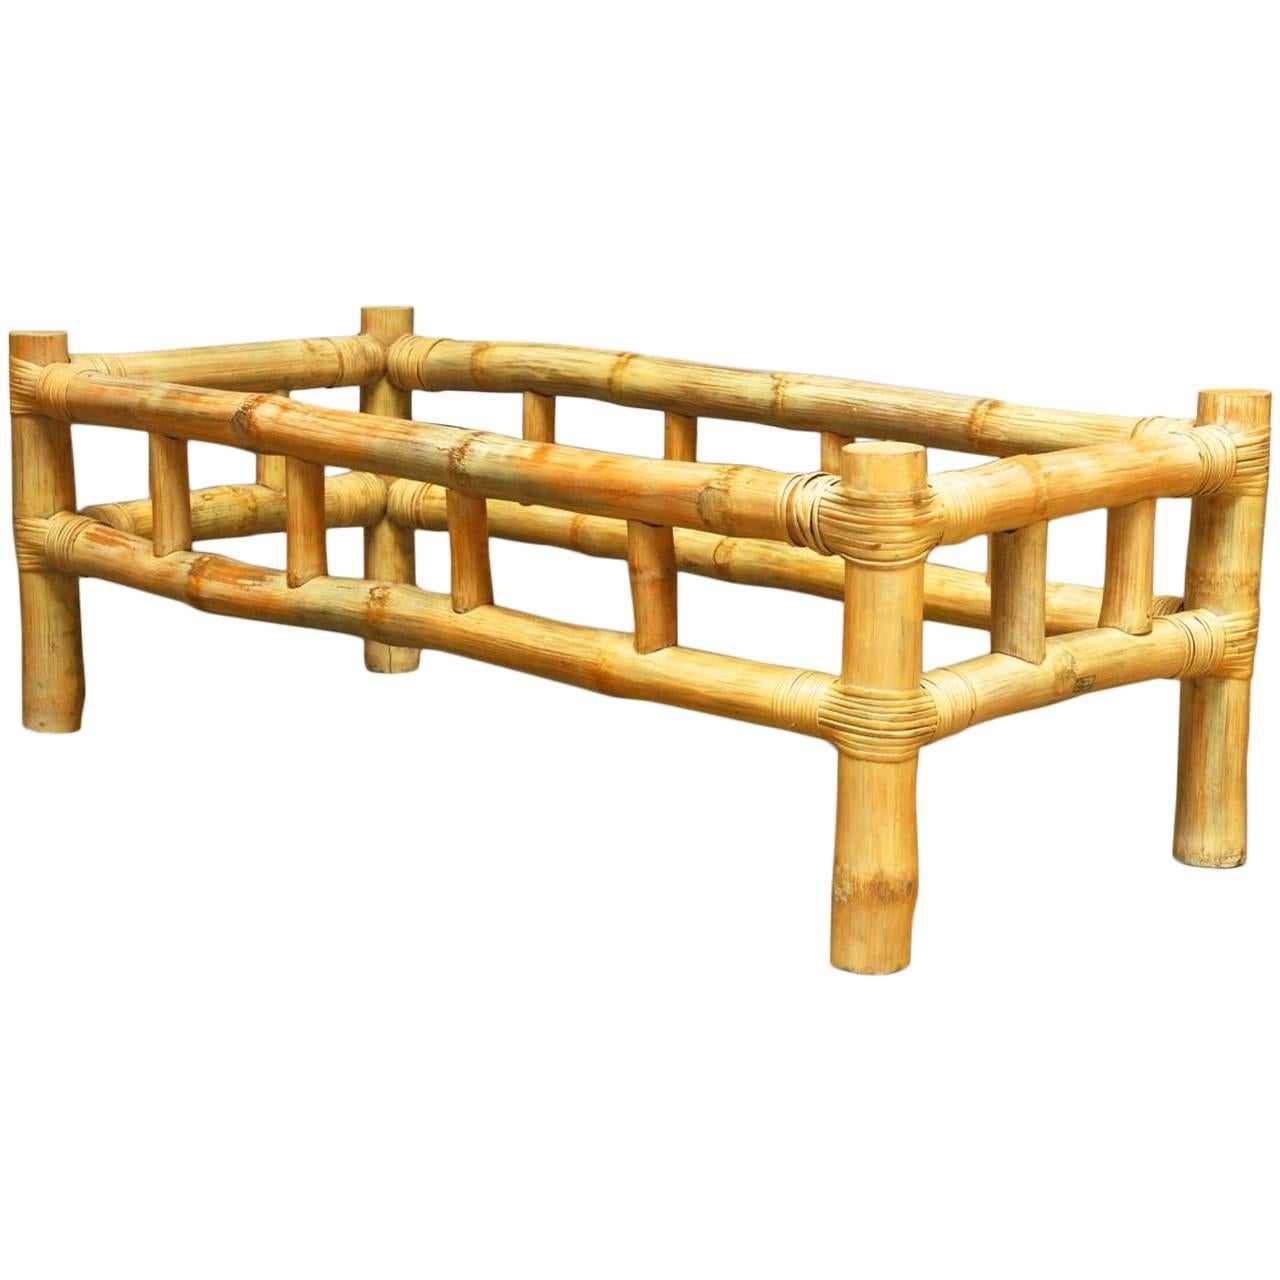 Organic Bamboo Coffee Table Attributed to Ralph Lauren